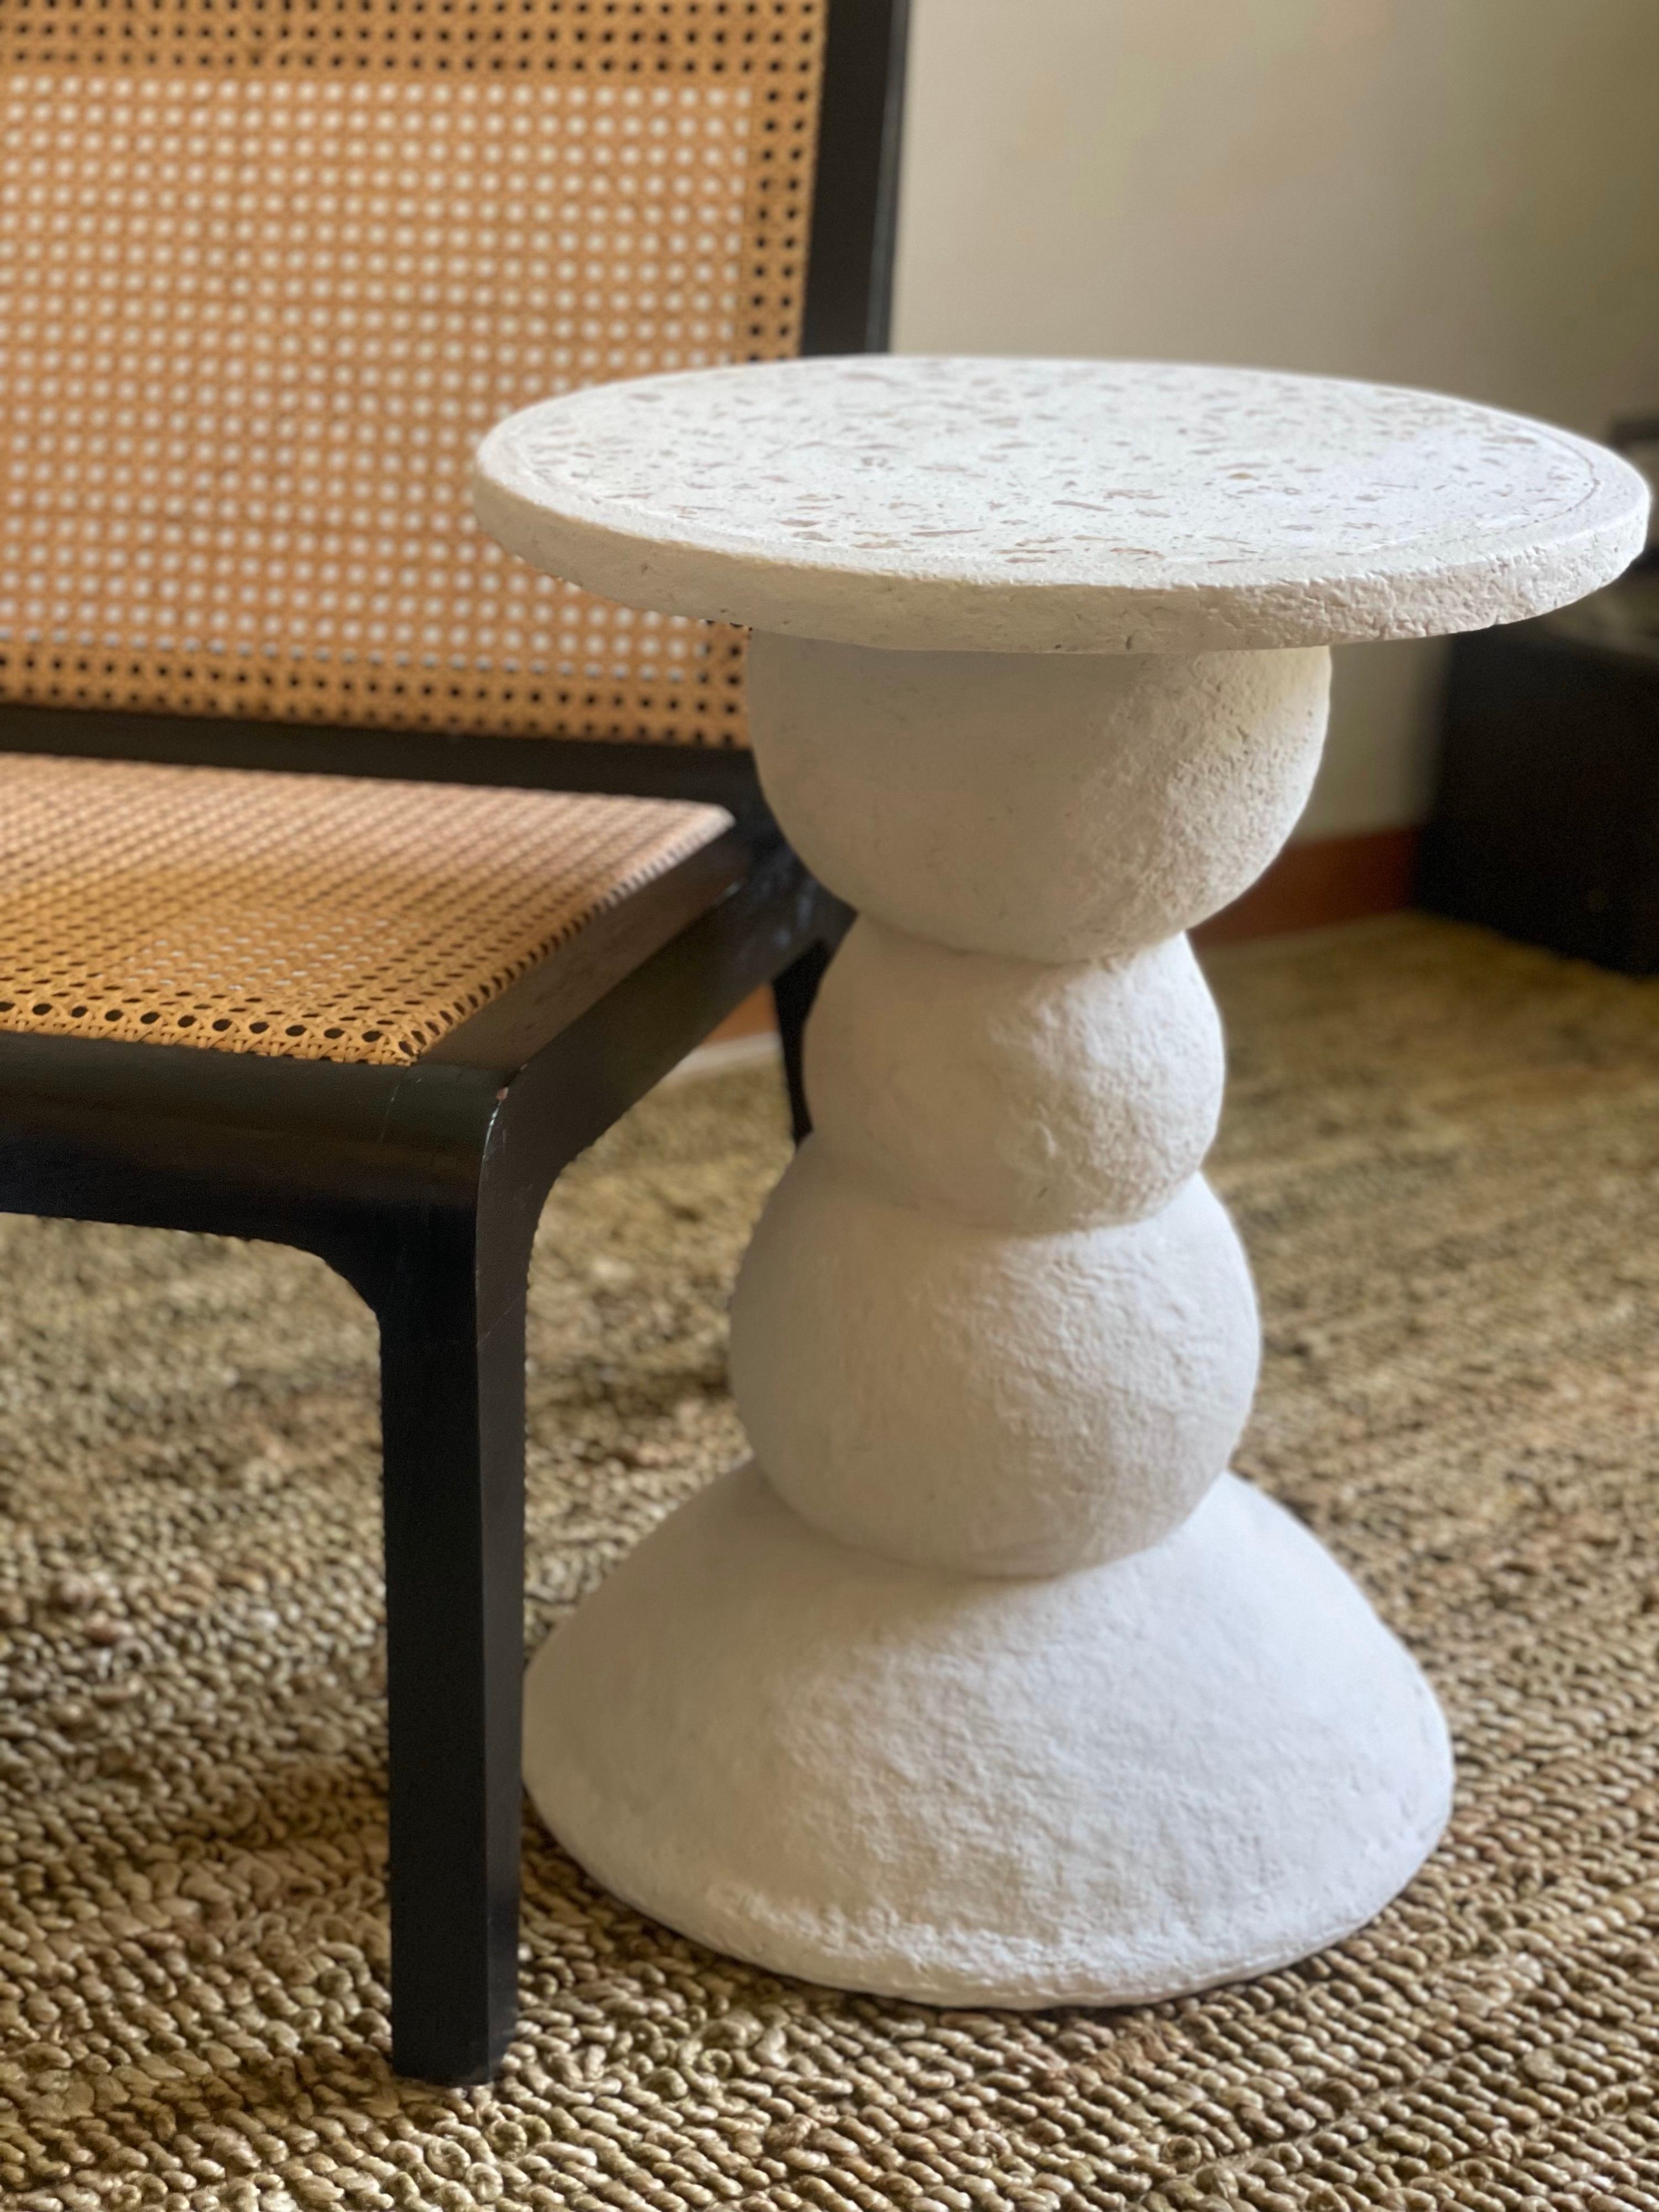 Amanita table by Ana Tron.
Handmade
Dimensions: D 40 x H 65 cm
Materials: Recycled paper with paste and matt water-based varnish. Concrete top with pieces of recycled wood.

Side table with base made of paper recycling and concrete top with recycled